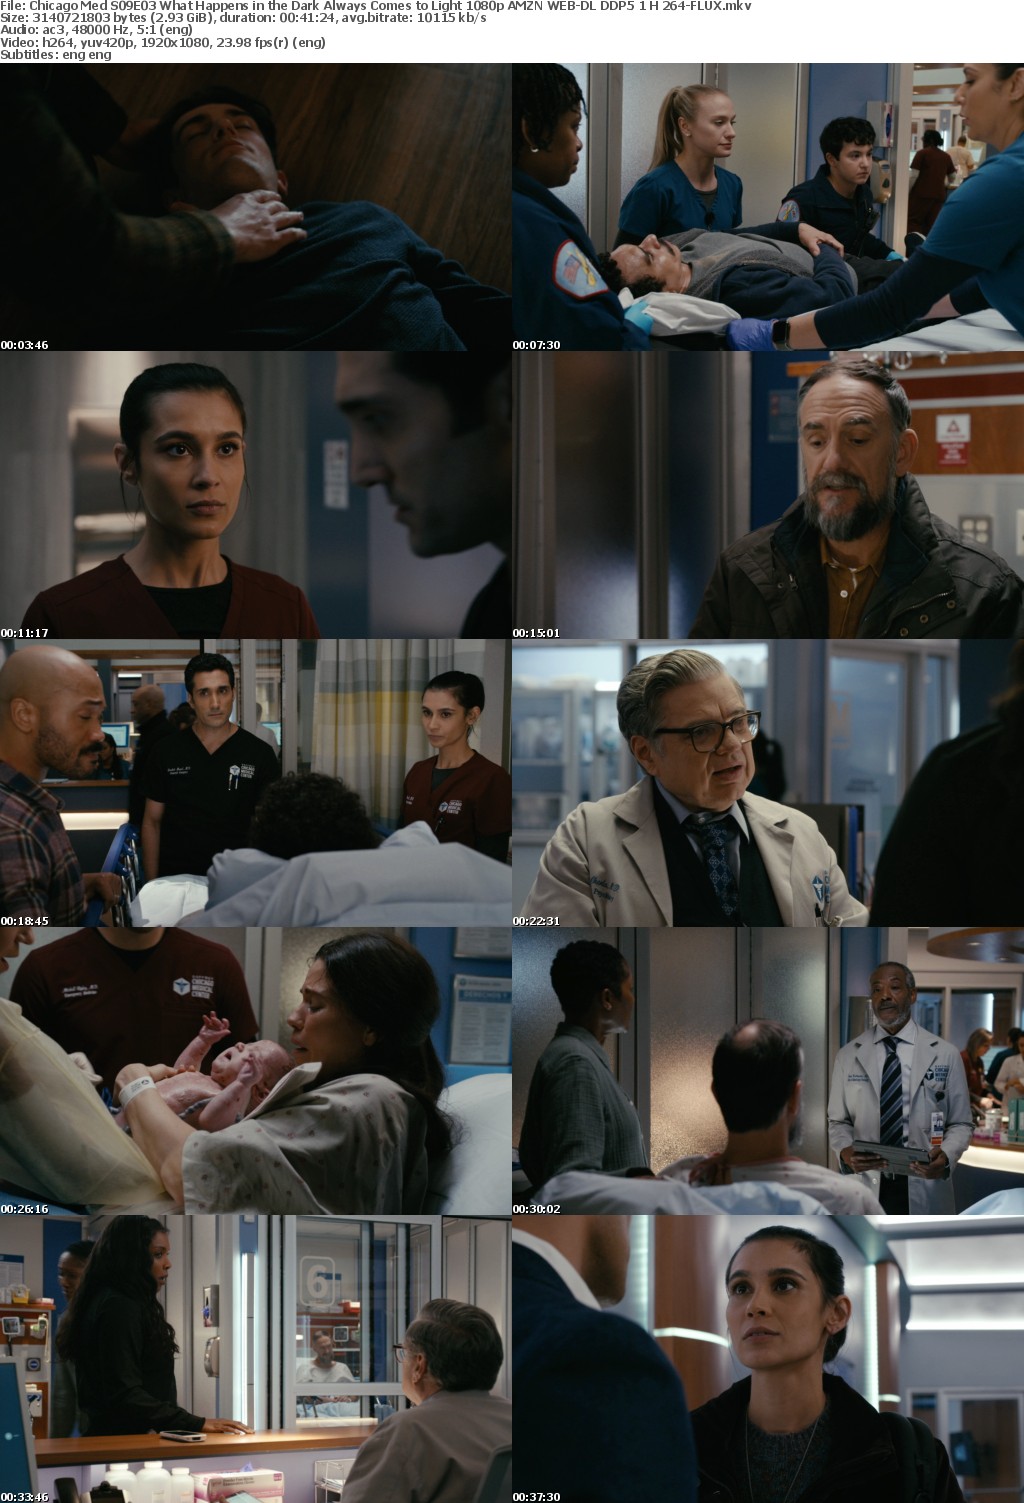 Chicago Med S09E03 What Happens in the Dark Always Comes to Light 1080p AMZN WEB-DL DDP5 1 H 264-FLUX